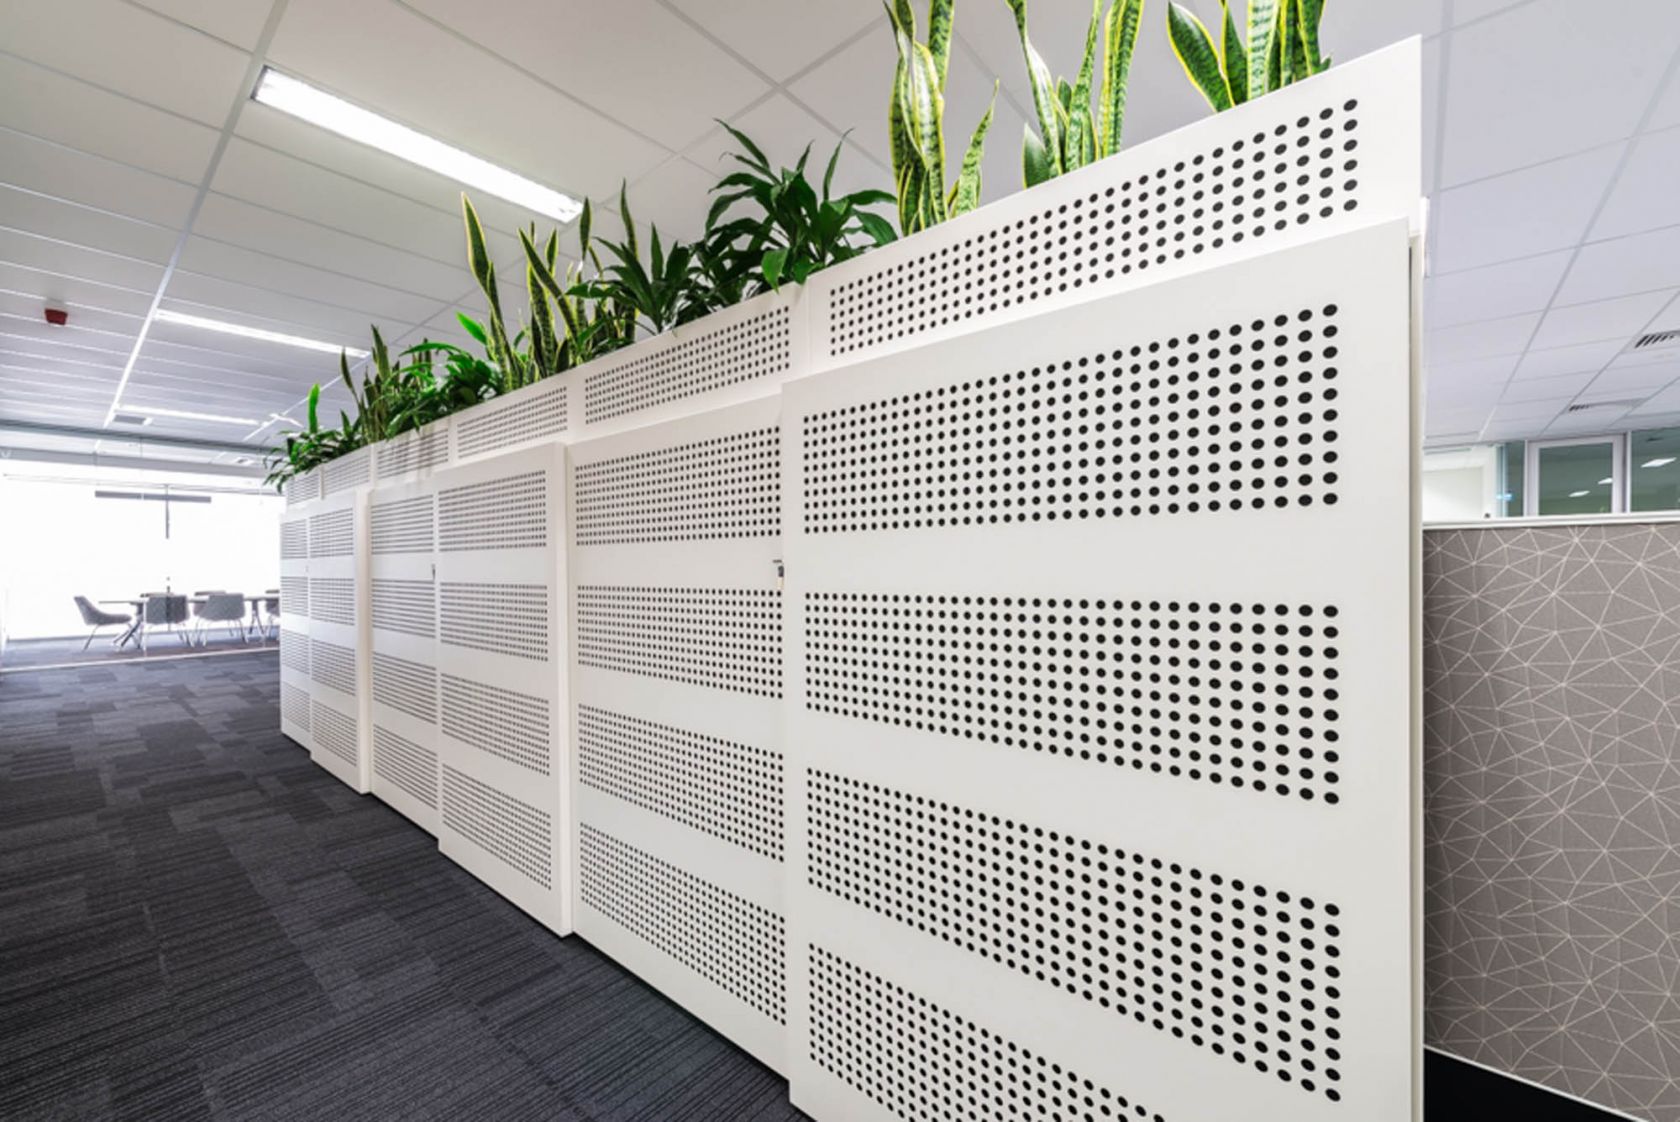 bdo adelaide partition perforated plants workplace fitout